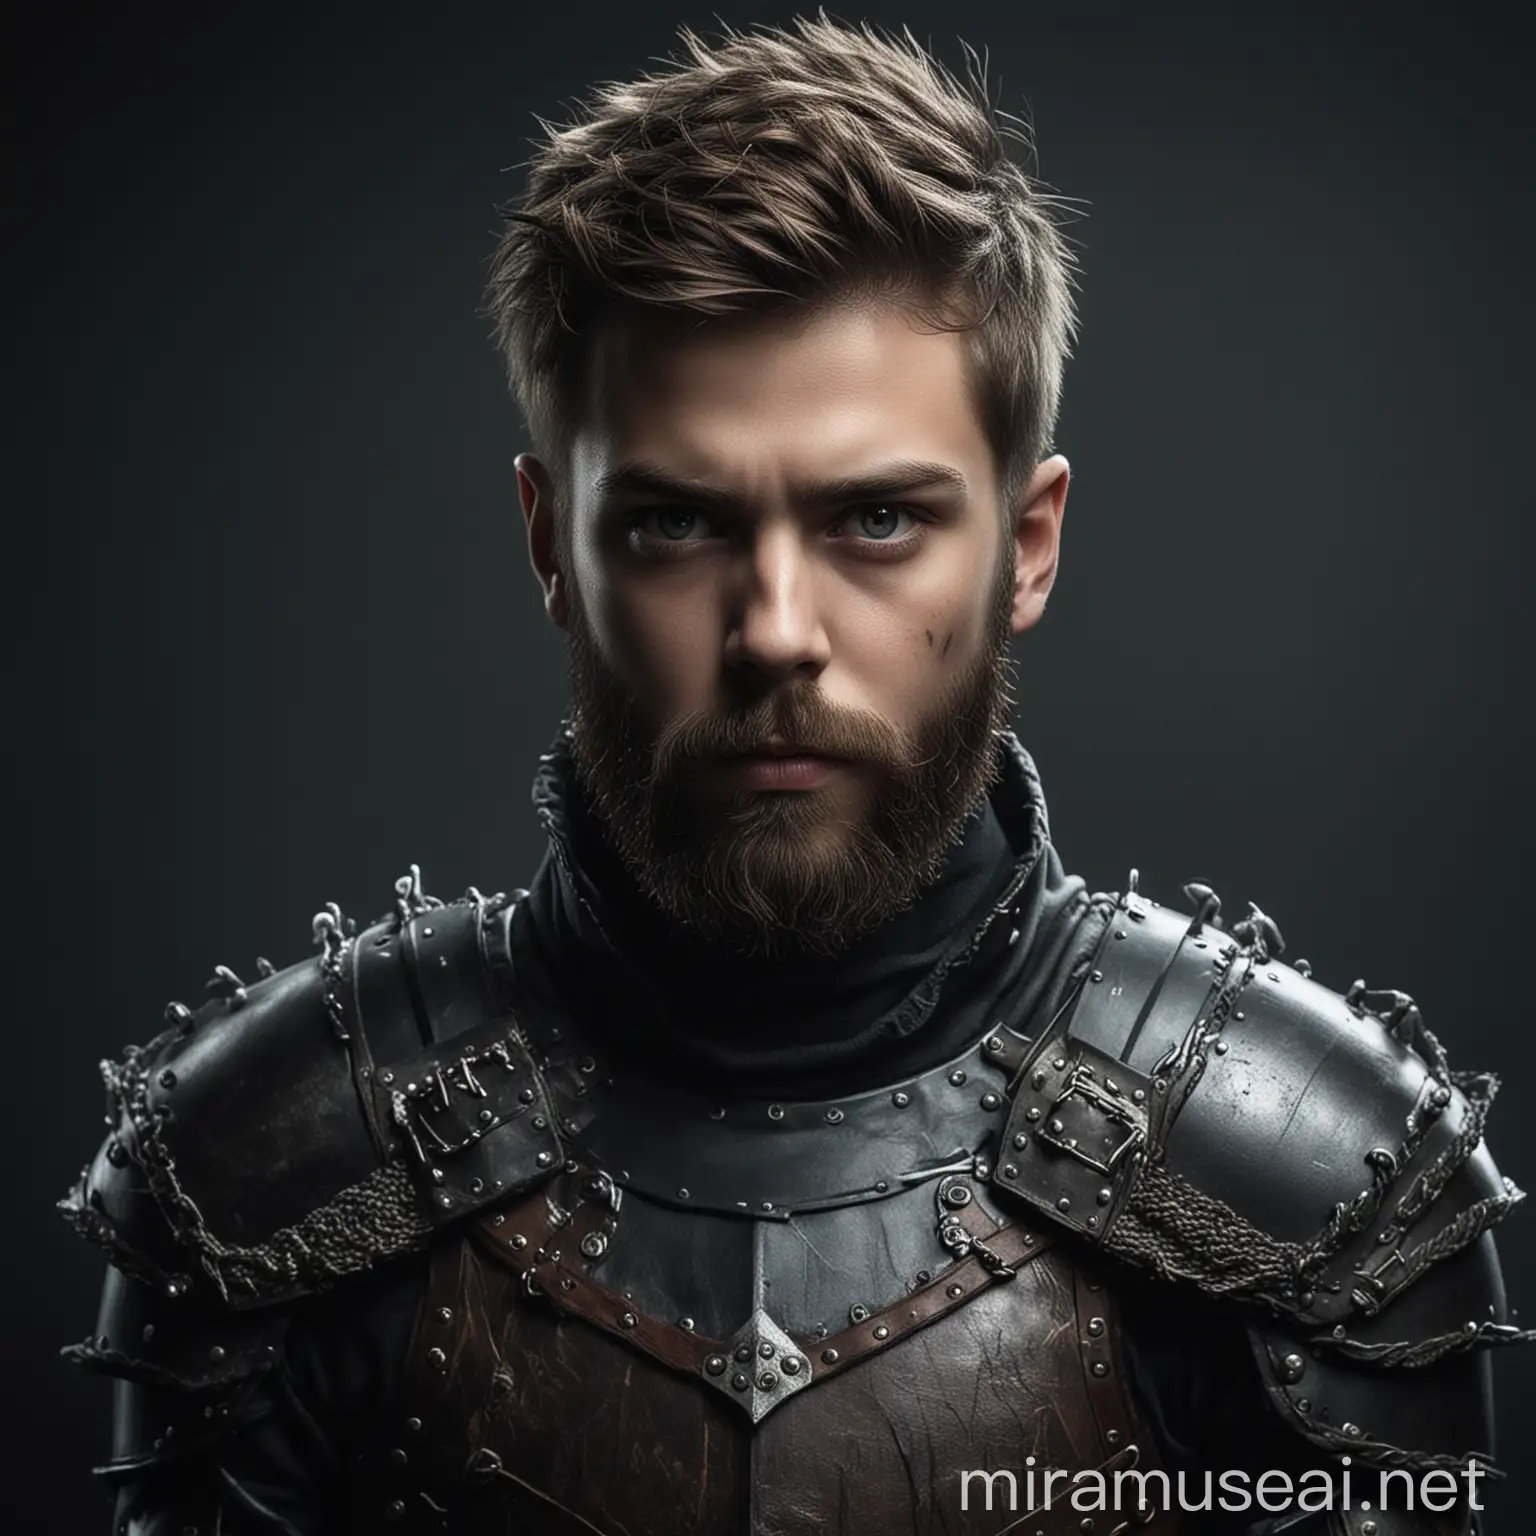 Fantasy Boy in Leather Armor with Beard Facing Scary Encounter